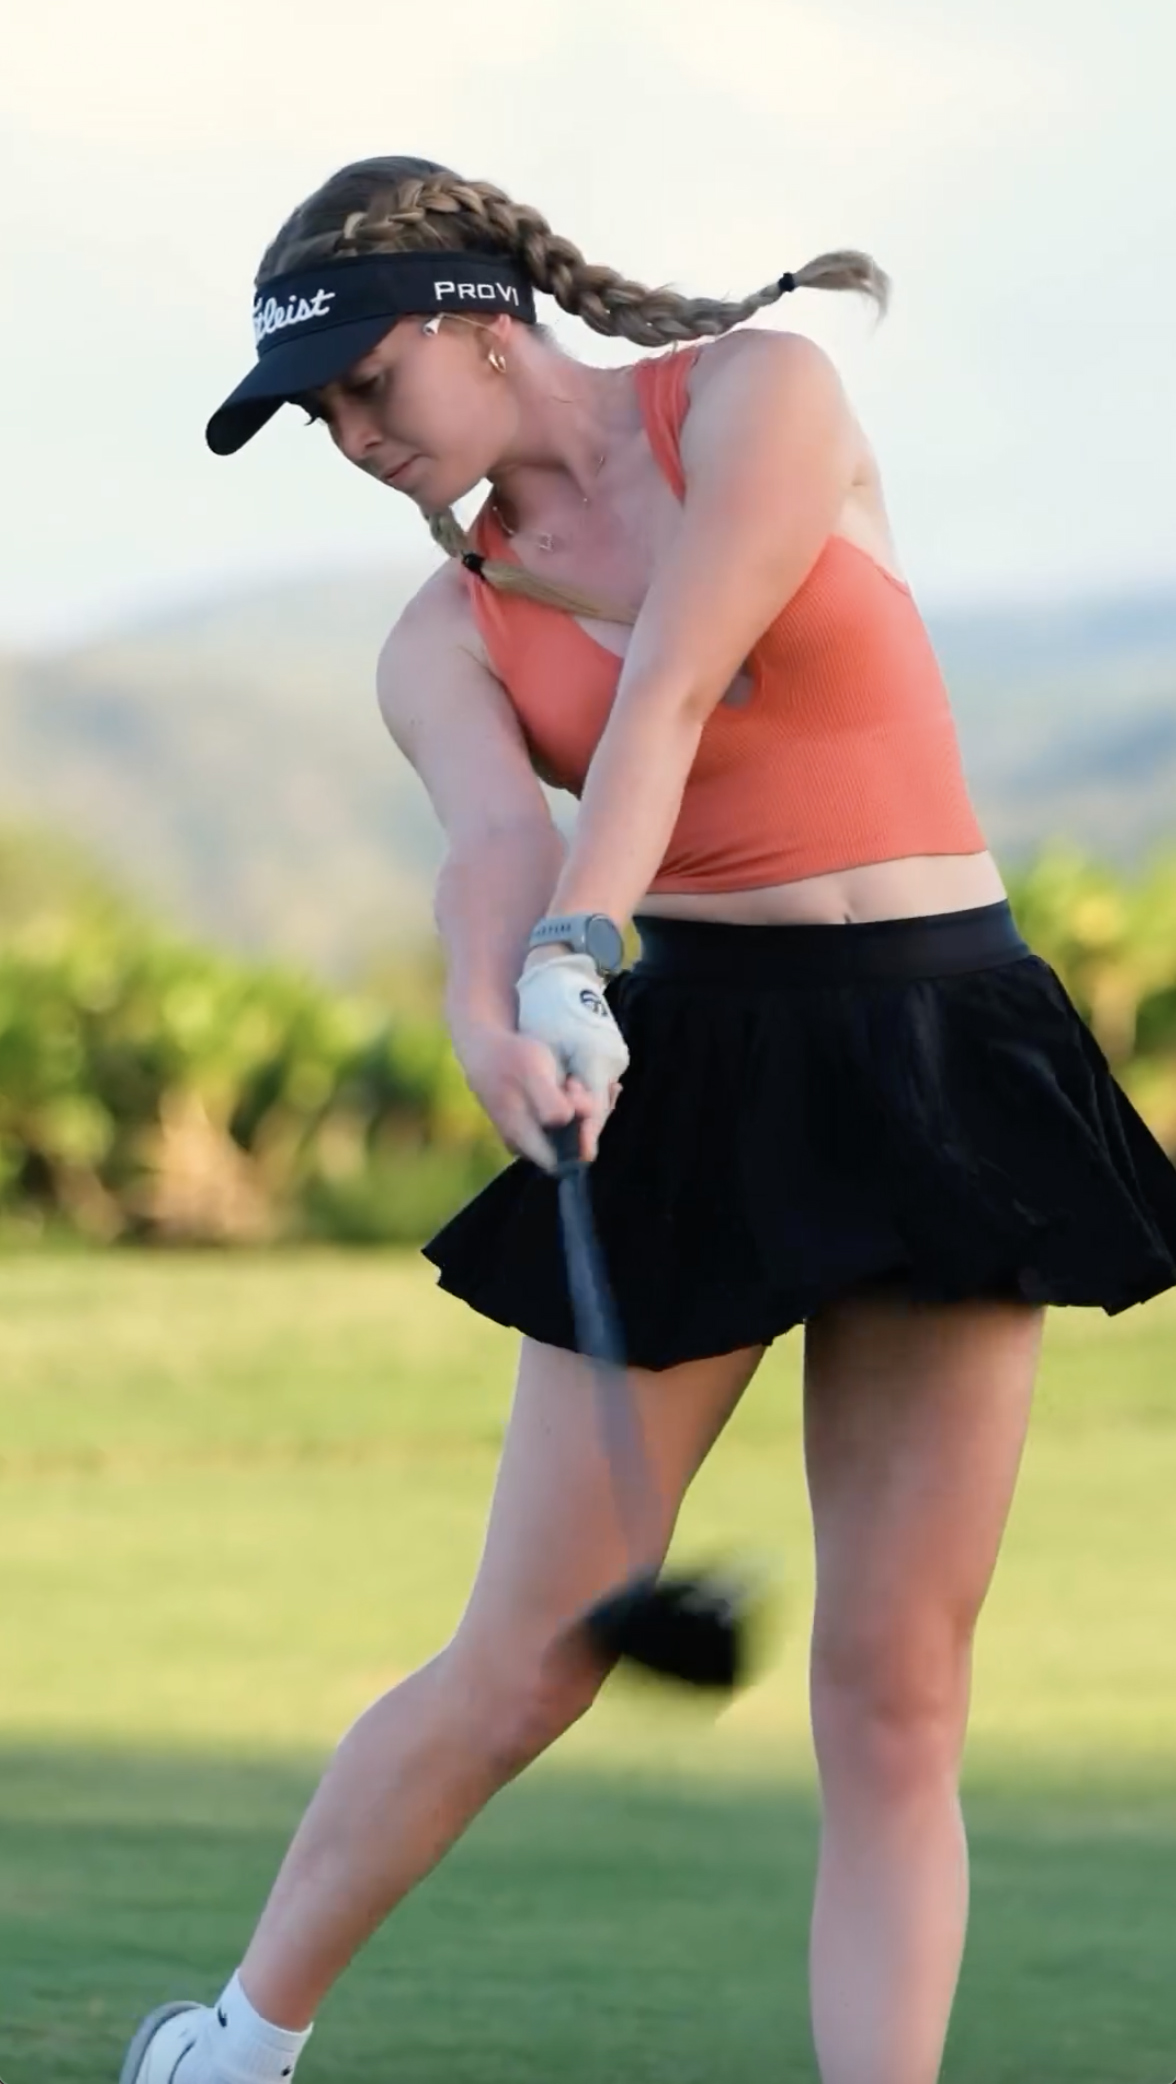 Charis showed off her toned figure while displaying her golf skills